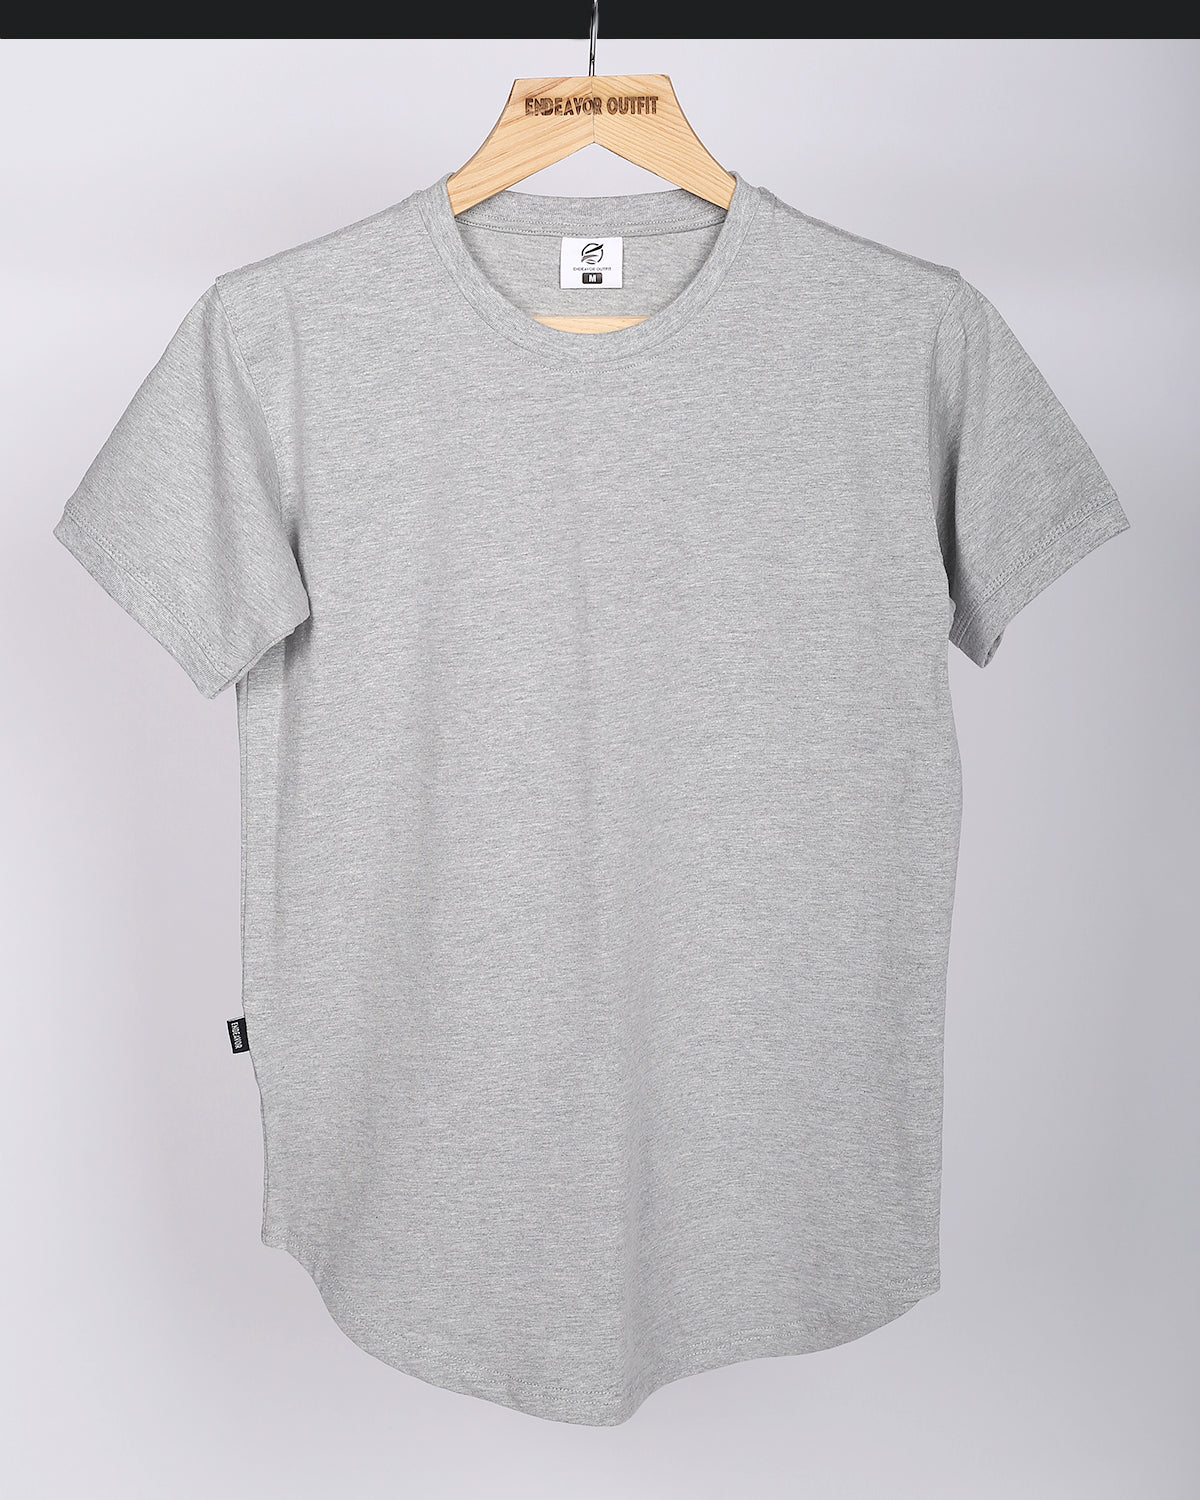 Endeavor Outfit Crewneck T-Shirts For Men-Haider Grey Endeavor Outfit